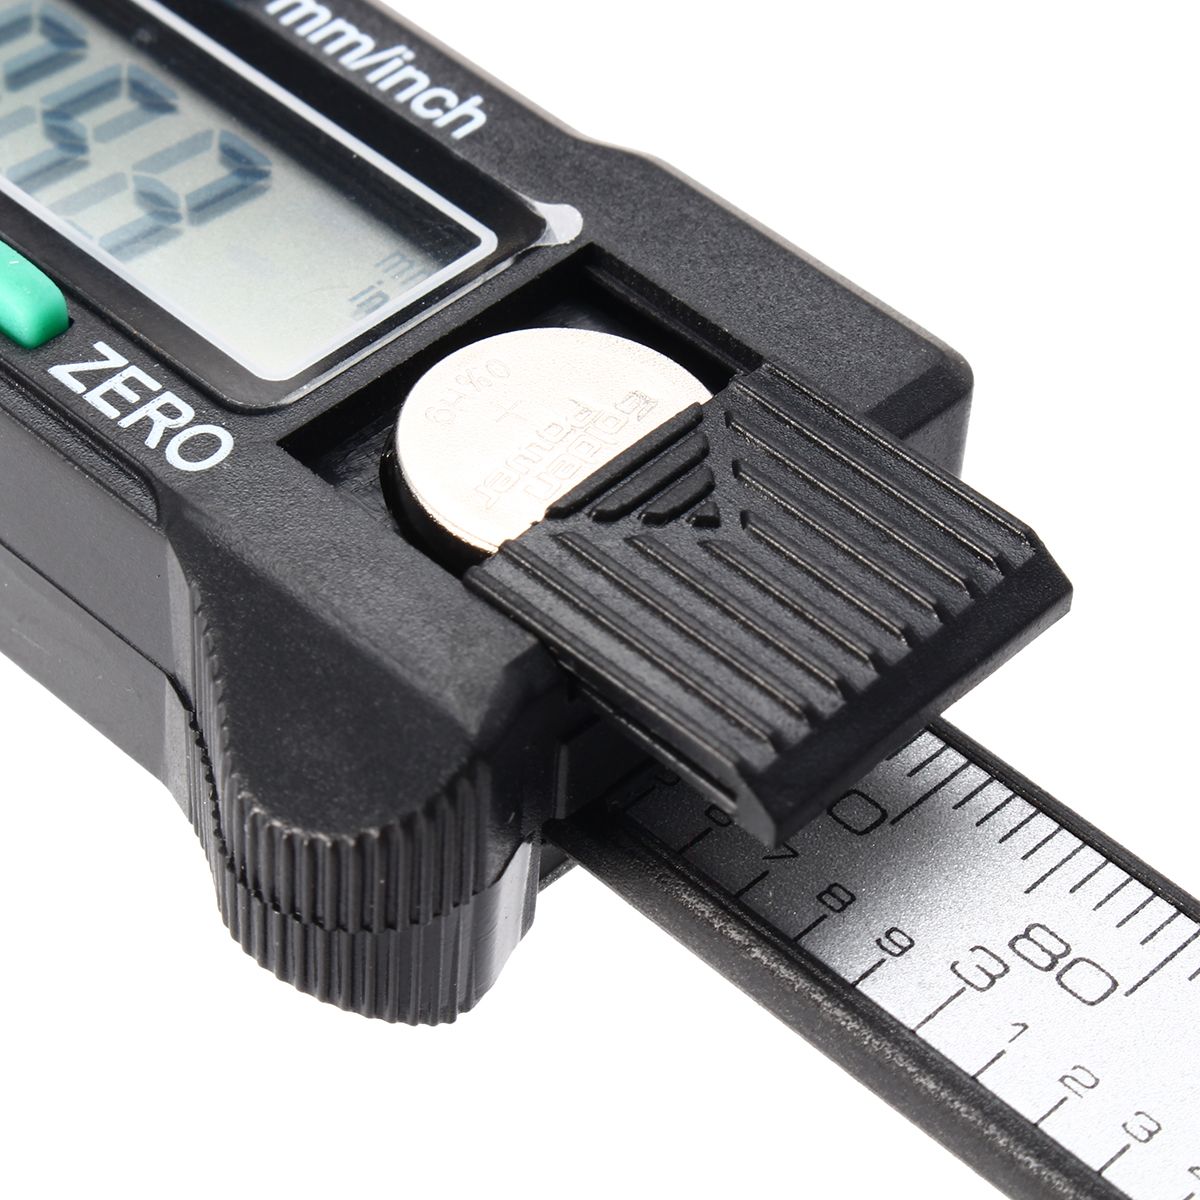 Stainless-Steel-Electronic-Vernier-Micrometer-Guage-Tool-with-LCD-Screen-Display-150mm-100mm-1255385